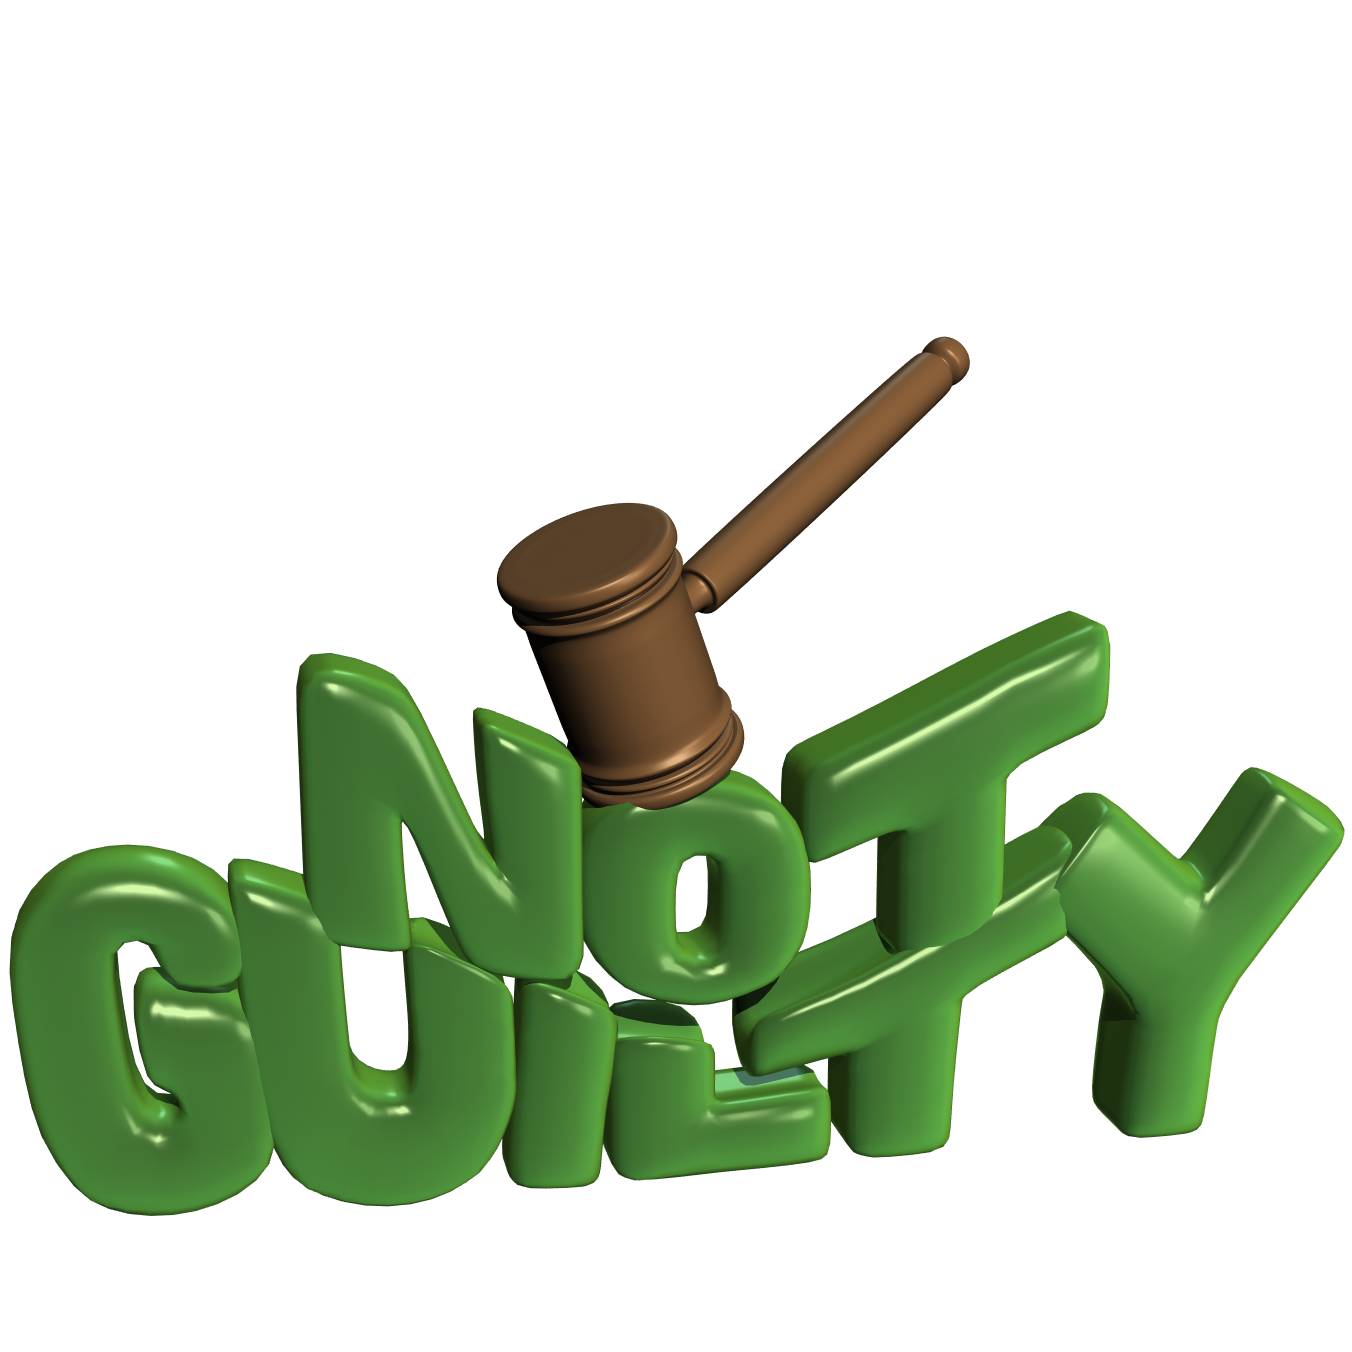 Not Guilty The Life Line